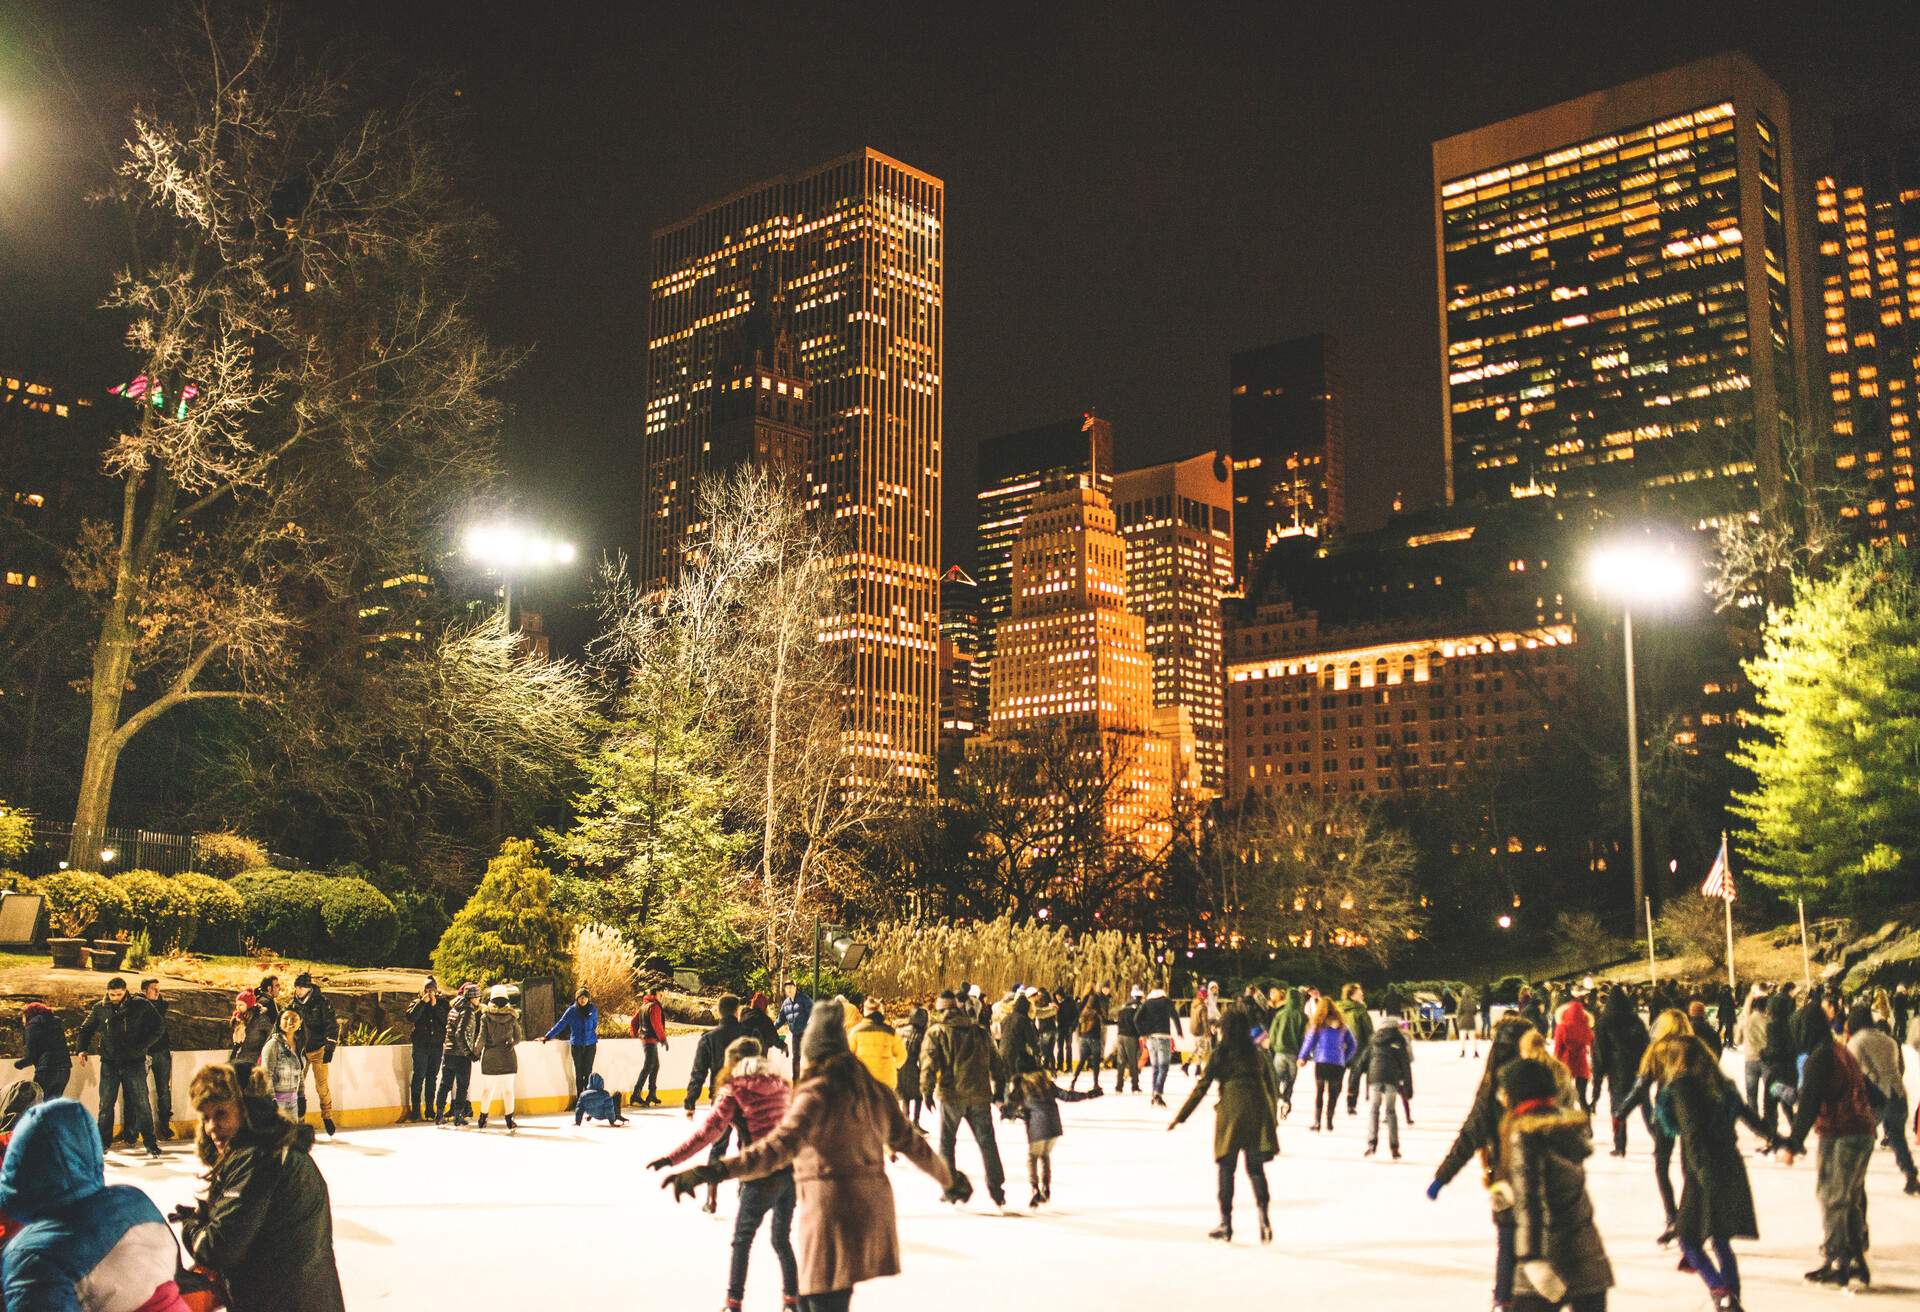 People ice skating in Central Park surrounded by tall trees with the illuminated skyscrapers of Midtown New York City in the background.